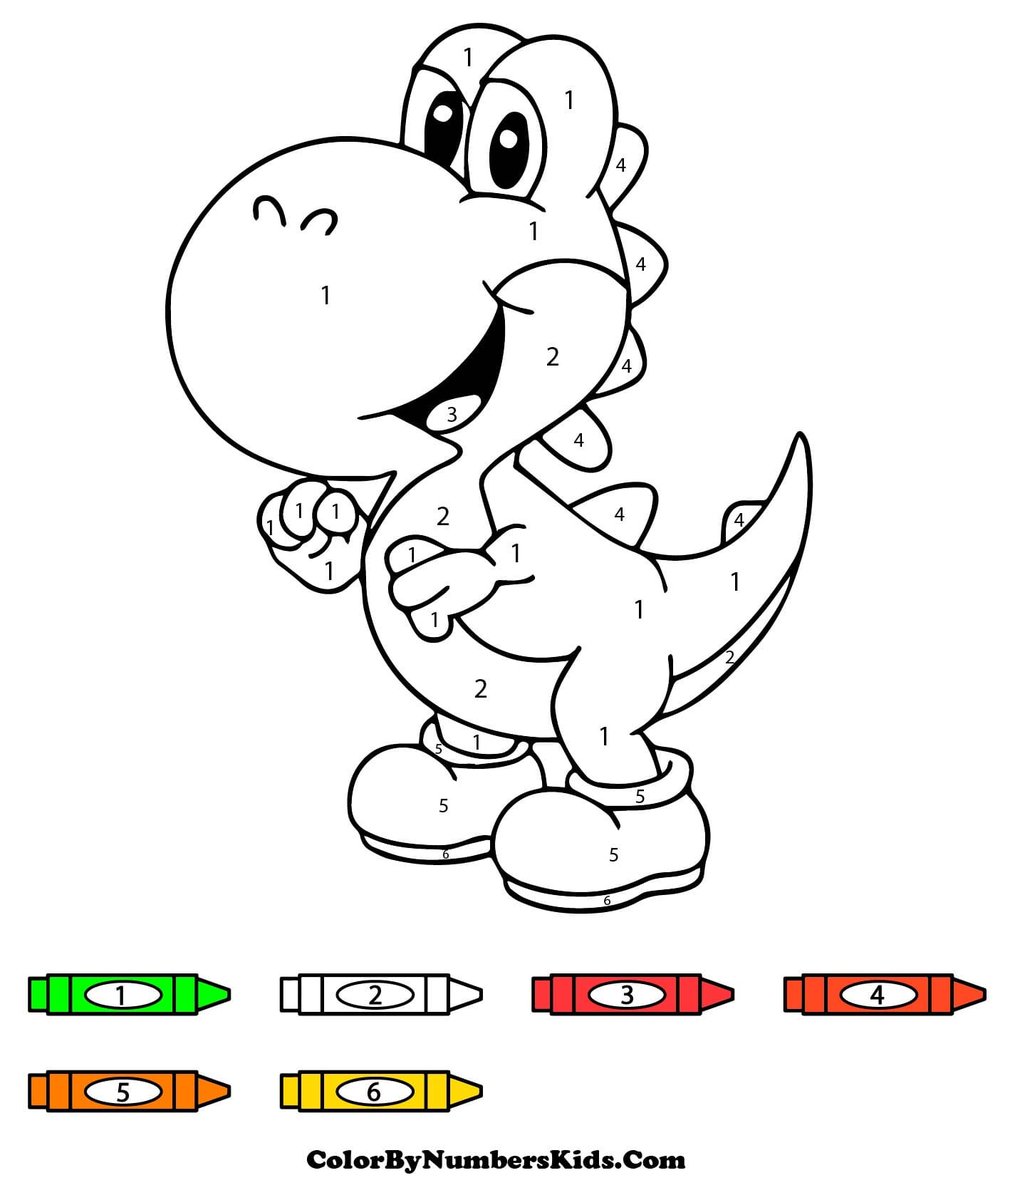 Yoshi Color By Number🦖🎮 colorbynumberskids.com/yoshi-color-by… #yoshi #Nintendo #Mario #Colorbynumberskids #colorbynumber #coloringpages #ColoringBook #art #fanart #sketch #drawing #draw #coloring #USA #trend #Trending #TrendingNow #Twitter #TwitterX